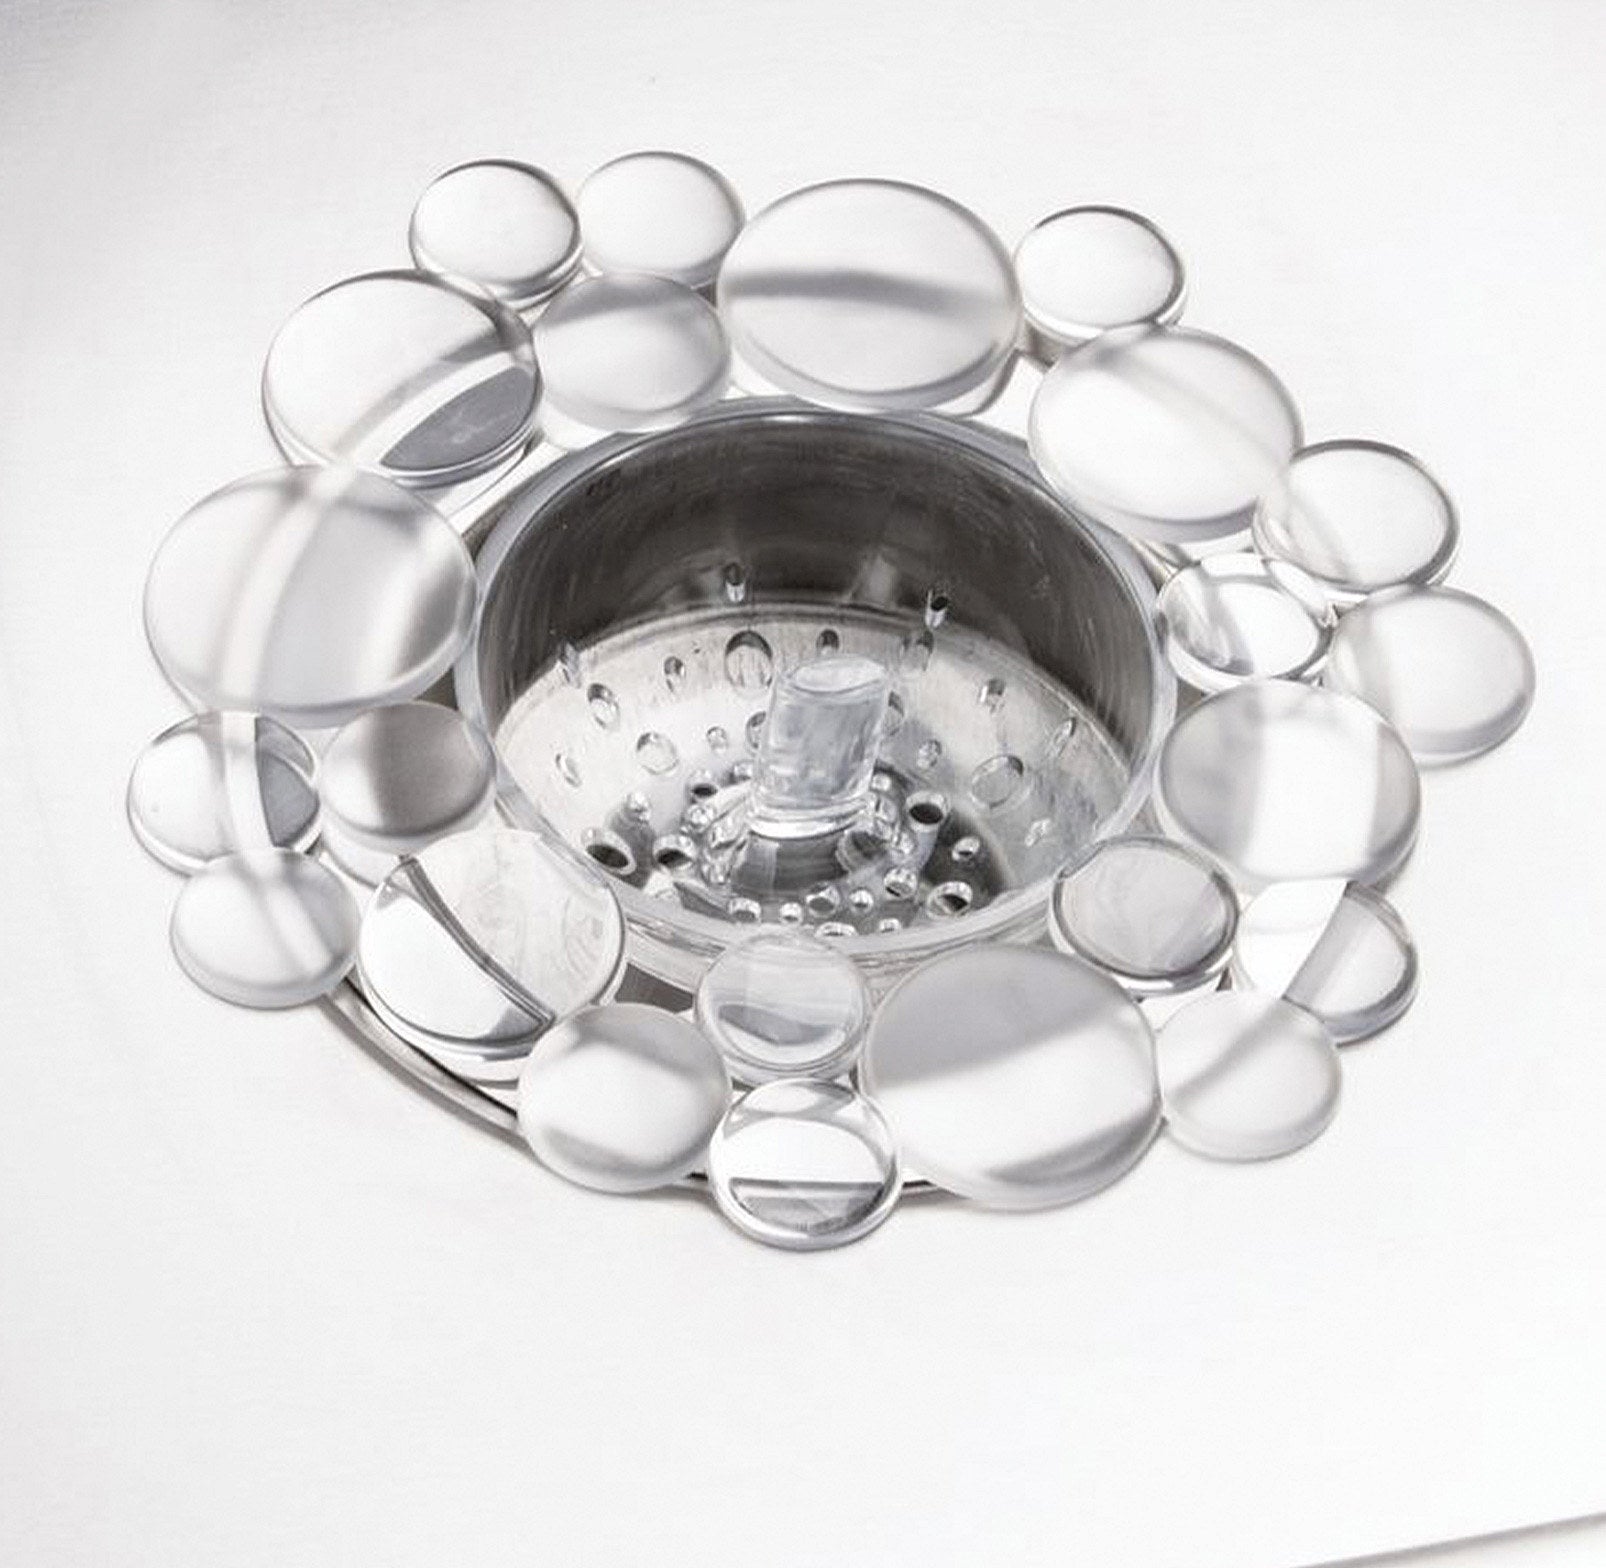 A close up of a transparent sink strainer shaped like bubbles